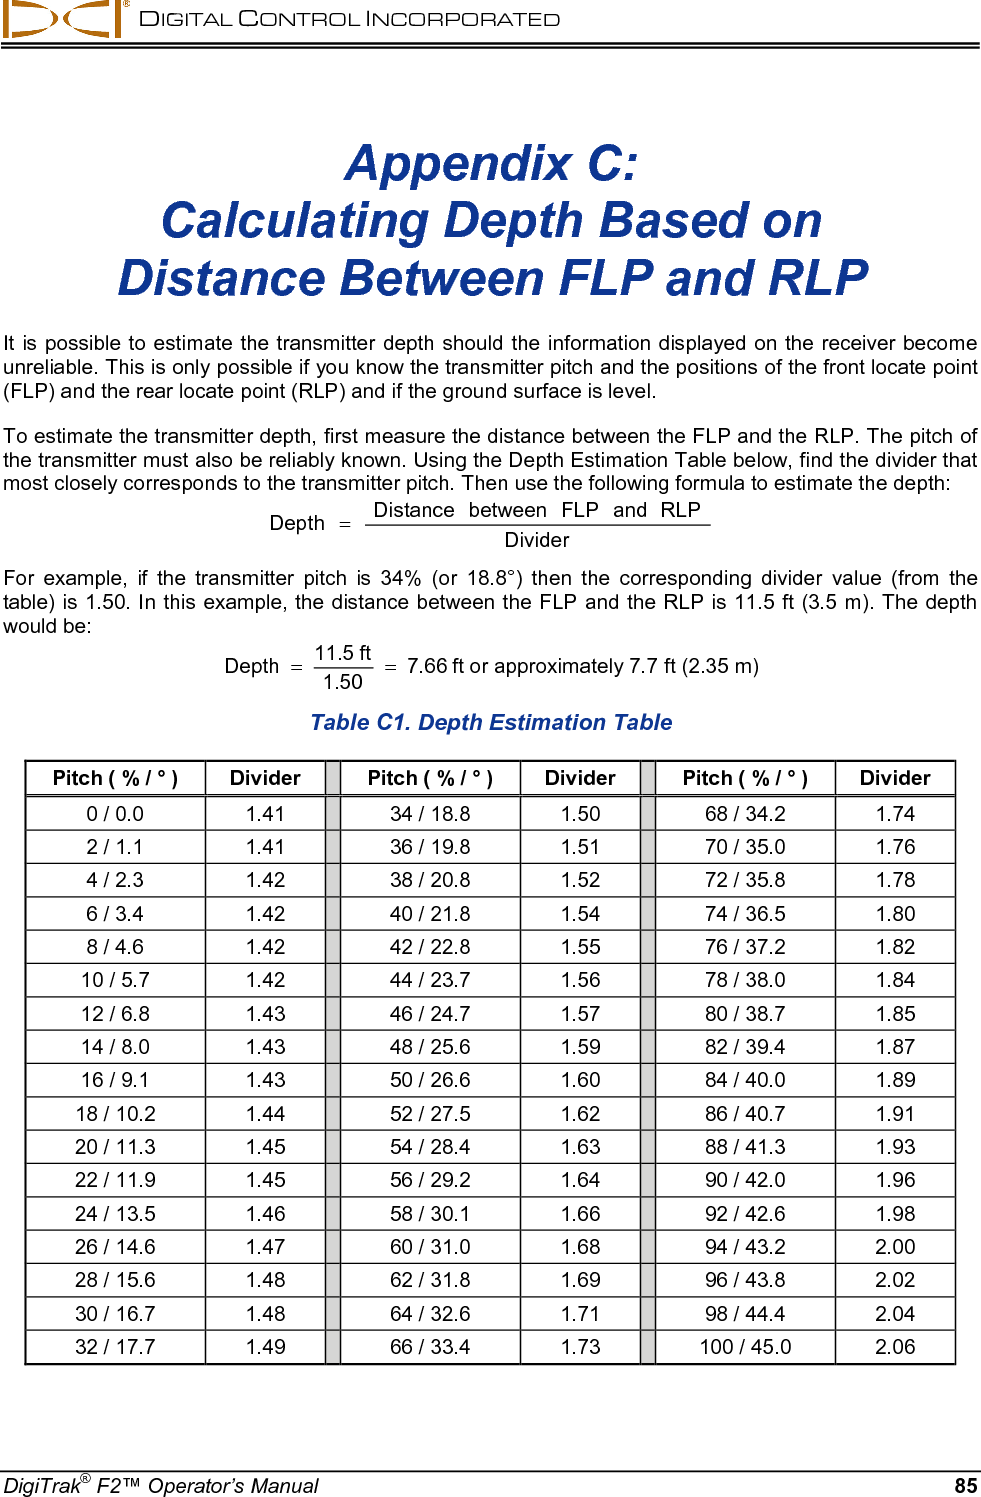  DIGITAL CONTROL INCORPORATED  DigiTrak® F2™ Operator’s Manual 85 Appendix C:  Calculating Depth Based on  Distance Between FLP and RLP  It is possible to estimate the transmitter depth should the information displayed on the receiver become unreliable. This is only possible if you know the transmitter pitch and the positions of the front locate point (FLP) and the rear locate point (RLP) and if the ground surface is level.  To estimate the transmitter depth, first measure the distance between the FLP and the RLP. The pitch of the transmitter must also be reliably known. Using the Depth Estimation Table below, find the divider that most closely corresponds to the transmitter pitch. Then use the following formula to estimate the depth: DividerRLPandFLPbetweenDistanceDepth = For example, if the transmitter pitch is 34% (or 18.8°) then the corresponding divider value (from the table) is 1.50. In this example, the distance between the FLP and the RLP is 11.5 ft (3.5 m). The depth would be: 7.661.50ft 11.5Depth ==ft or approximately 7.7 ft (2.35 m)  Table C1. Depth Estimation Table Pitch ( % / ° ) Divider    Pitch ( % / ° ) Divider    Pitch ( % / ° ) Divider 0 / 0.0 1.41    34 / 18.8 1.50    68 / 34.2 1.74 2 / 1.1 1.41    36 / 19.8 1.51    70 / 35.0 1.76 4 / 2.3 1.42    38 / 20.8 1.52    72 / 35.8 1.78 6 / 3.4 1.42    40 / 21.8 1.54    74 / 36.5 1.80 8 / 4.6 1.42    42 / 22.8 1.55    76 / 37.2 1.82 10 / 5.7 1.42    44 / 23.7 1.56    78 / 38.0 1.84 12 / 6.8 1.43    46 / 24.7 1.57    80 / 38.7 1.85 14 / 8.0 1.43    48 / 25.6 1.59    82 / 39.4 1.87 16 / 9.1 1.43    50 / 26.6 1.60    84 / 40.0 1.89 18 / 10.2 1.44    52 / 27.5 1.62    86 / 40.7 1.91 20 / 11.3 1.45    54 / 28.4 1.63    88 / 41.3 1.93 22 / 11.9 1.45    56 / 29.2 1.64    90 / 42.0 1.96 24 / 13.5 1.46    58 / 30.1 1.66    92 / 42.6 1.98 26 / 14.6 1.47    60 / 31.0 1.68    94 / 43.2 2.00 28 / 15.6 1.48    62 / 31.8 1.69    96 / 43.8 2.02 30 / 16.7 1.48    64 / 32.6 1.71    98 / 44.4 2.04 32 / 17.7 1.49    66 / 33.4 1.73    100 / 45.0 2.06  